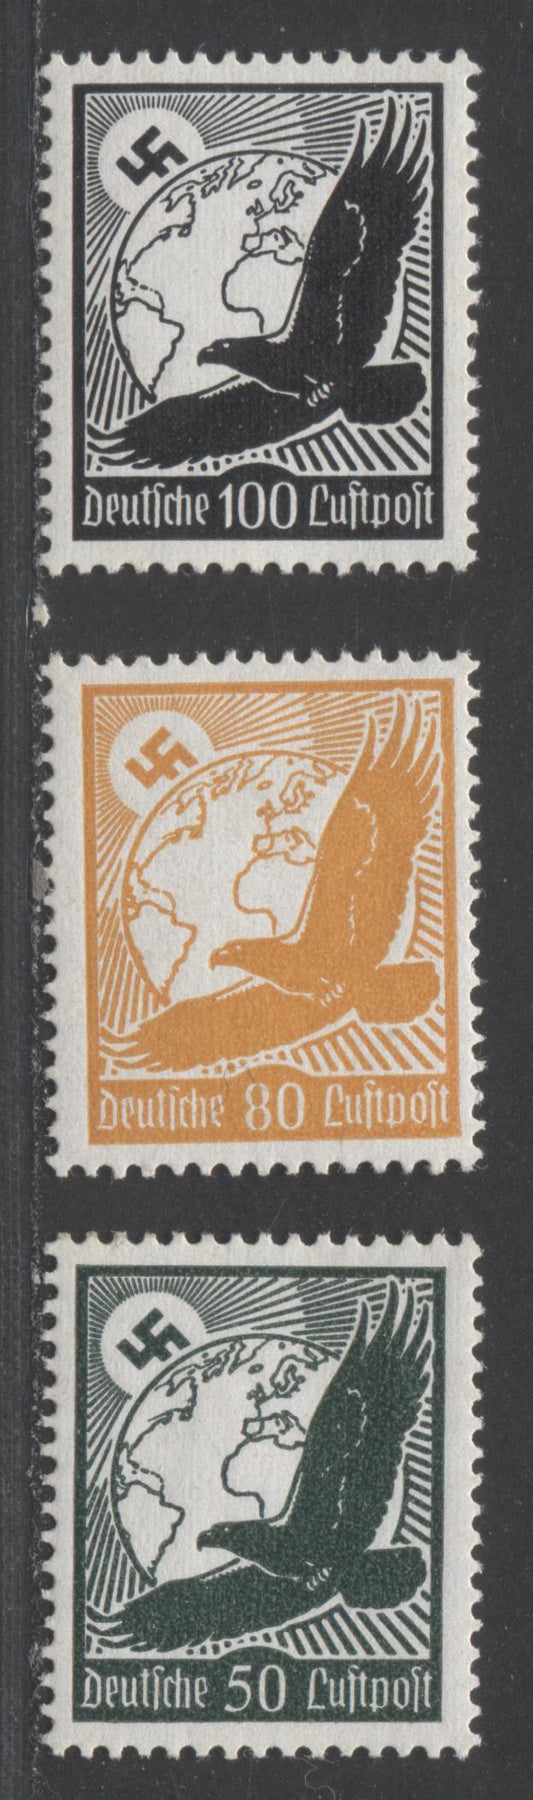 Lot 73 Germany SC#C52-C54 1934 Airmail Issue, , 3 VFOG Singles, Click on Listing to See ALL Pictures, 2022 Scott Classic Cat. $23.25 USD